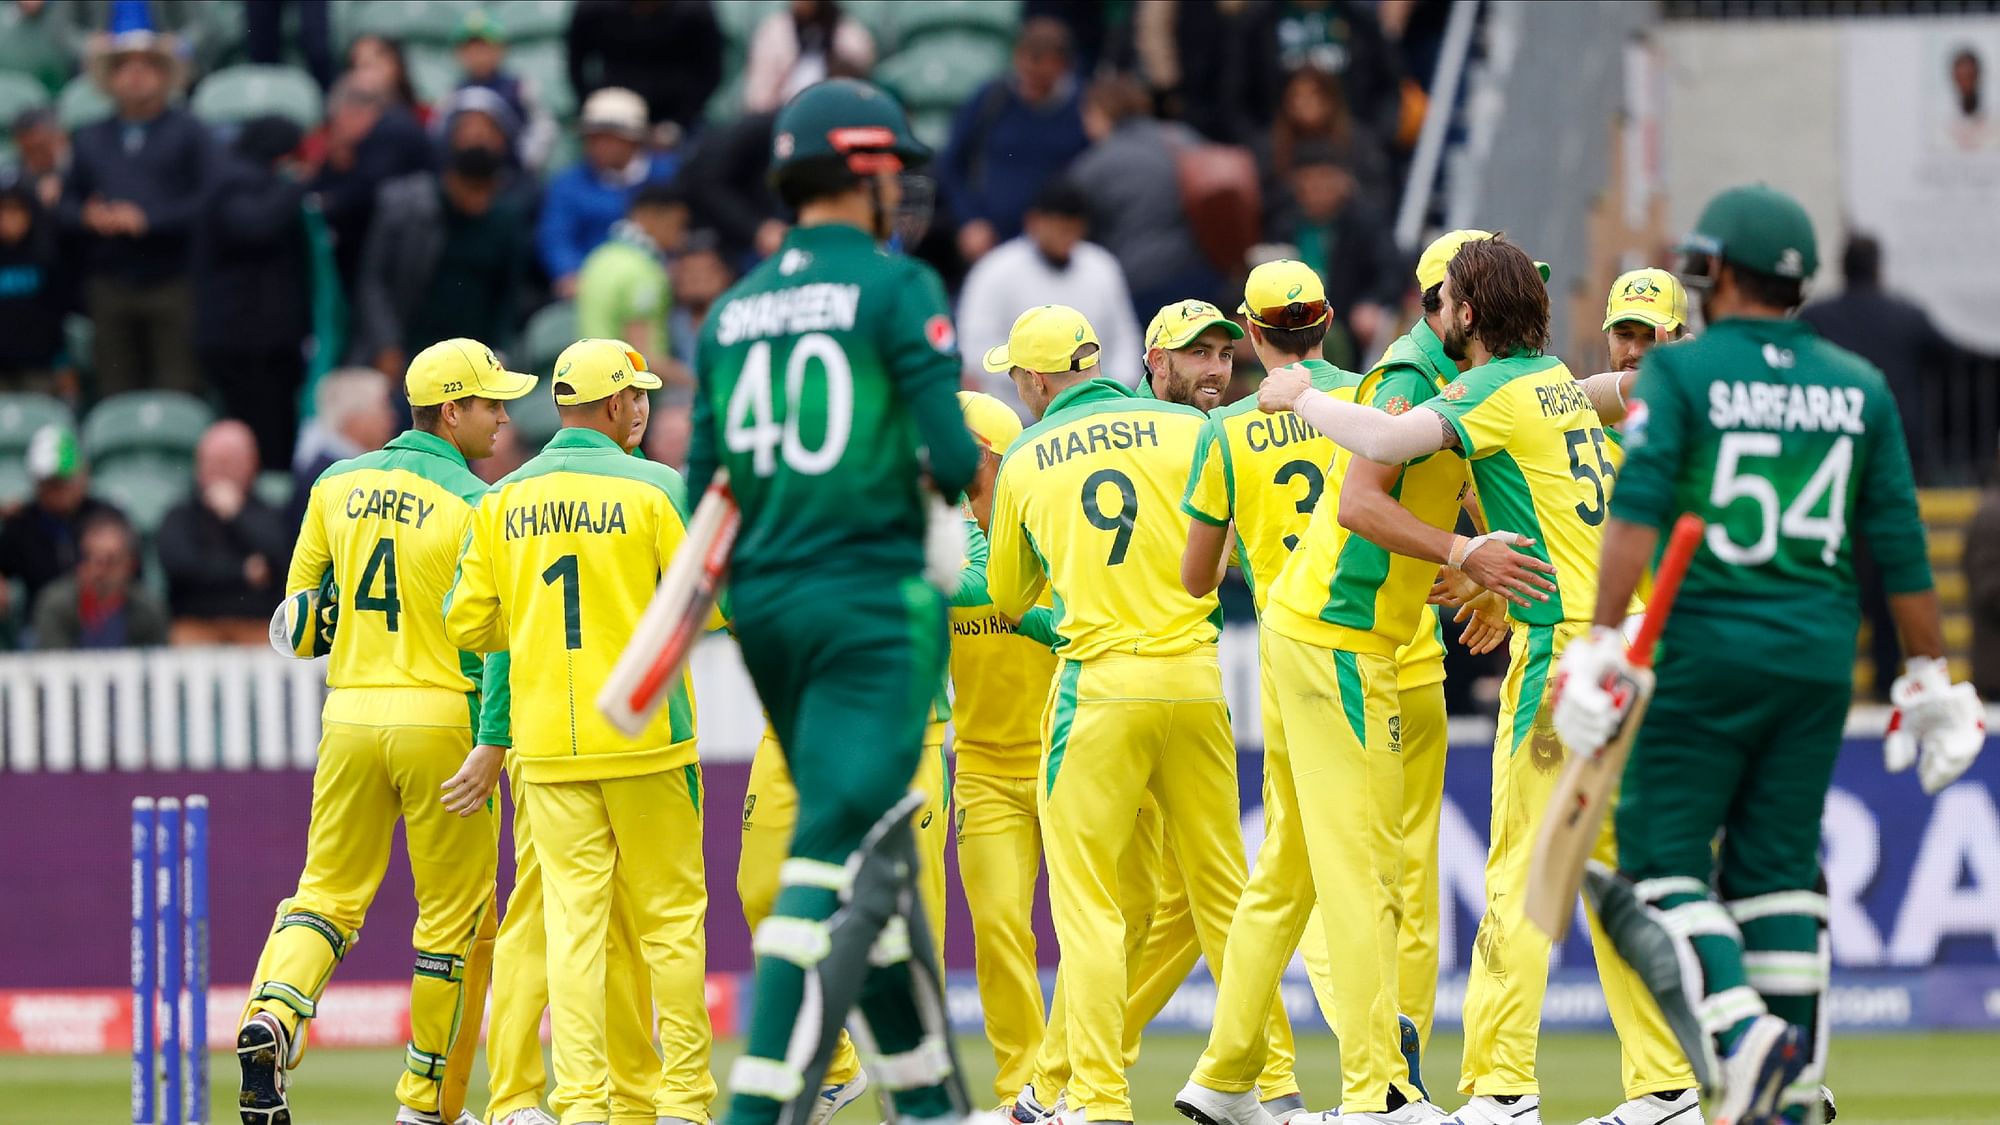 Pakistan were bowled out in 45.4 overs against Australia.&nbsp;